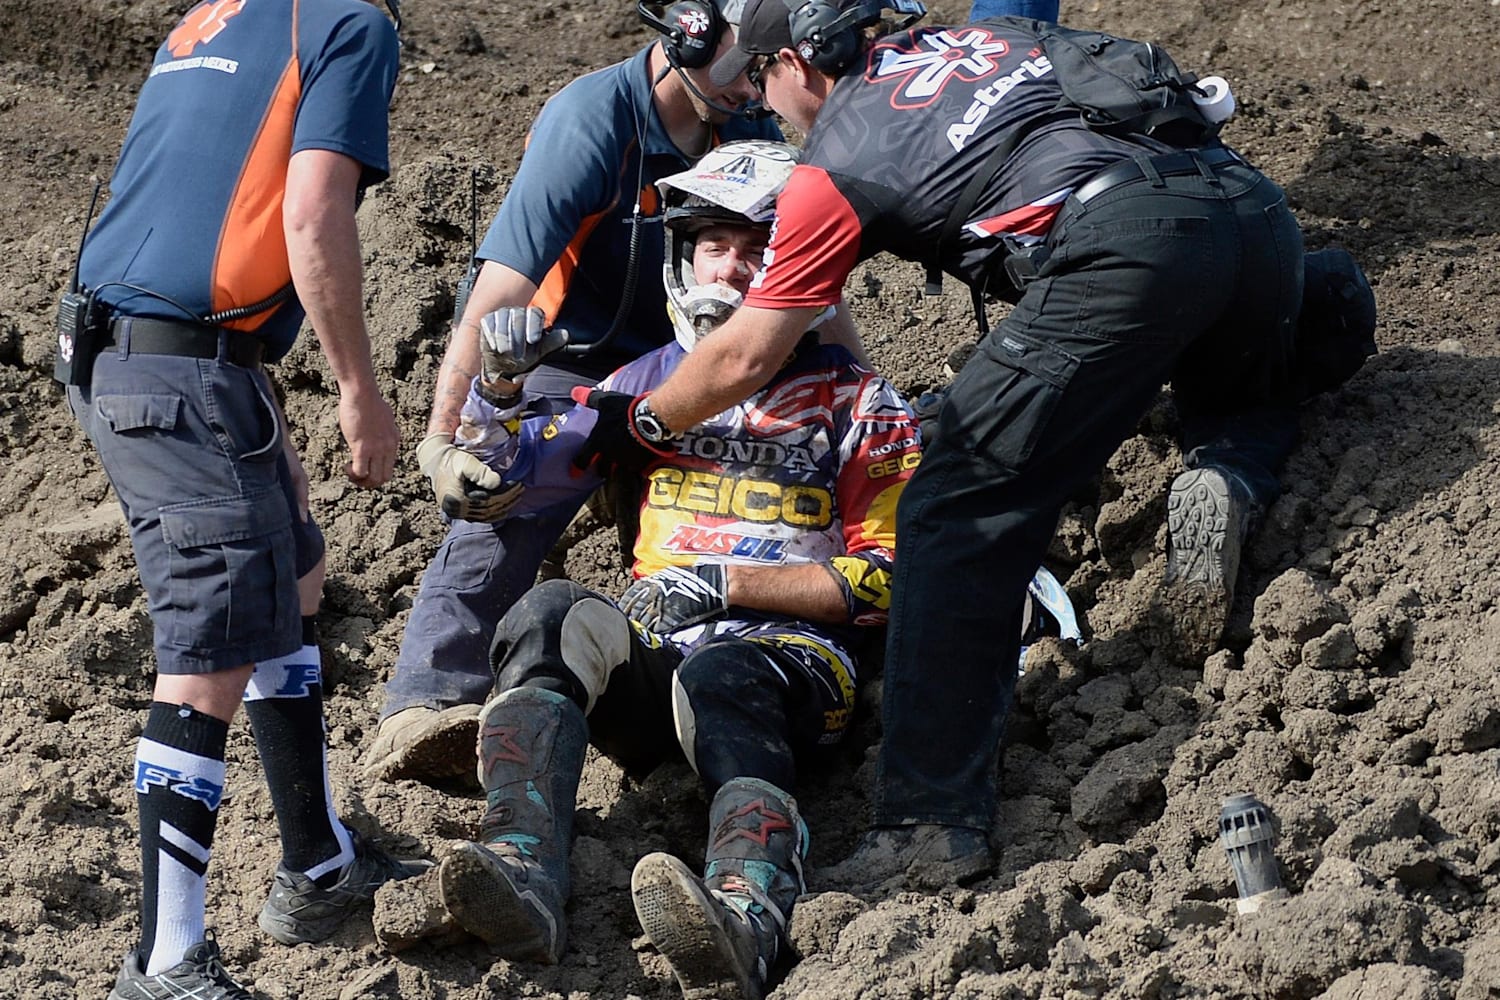 Costly crashes in AMA Supercross and Motocross